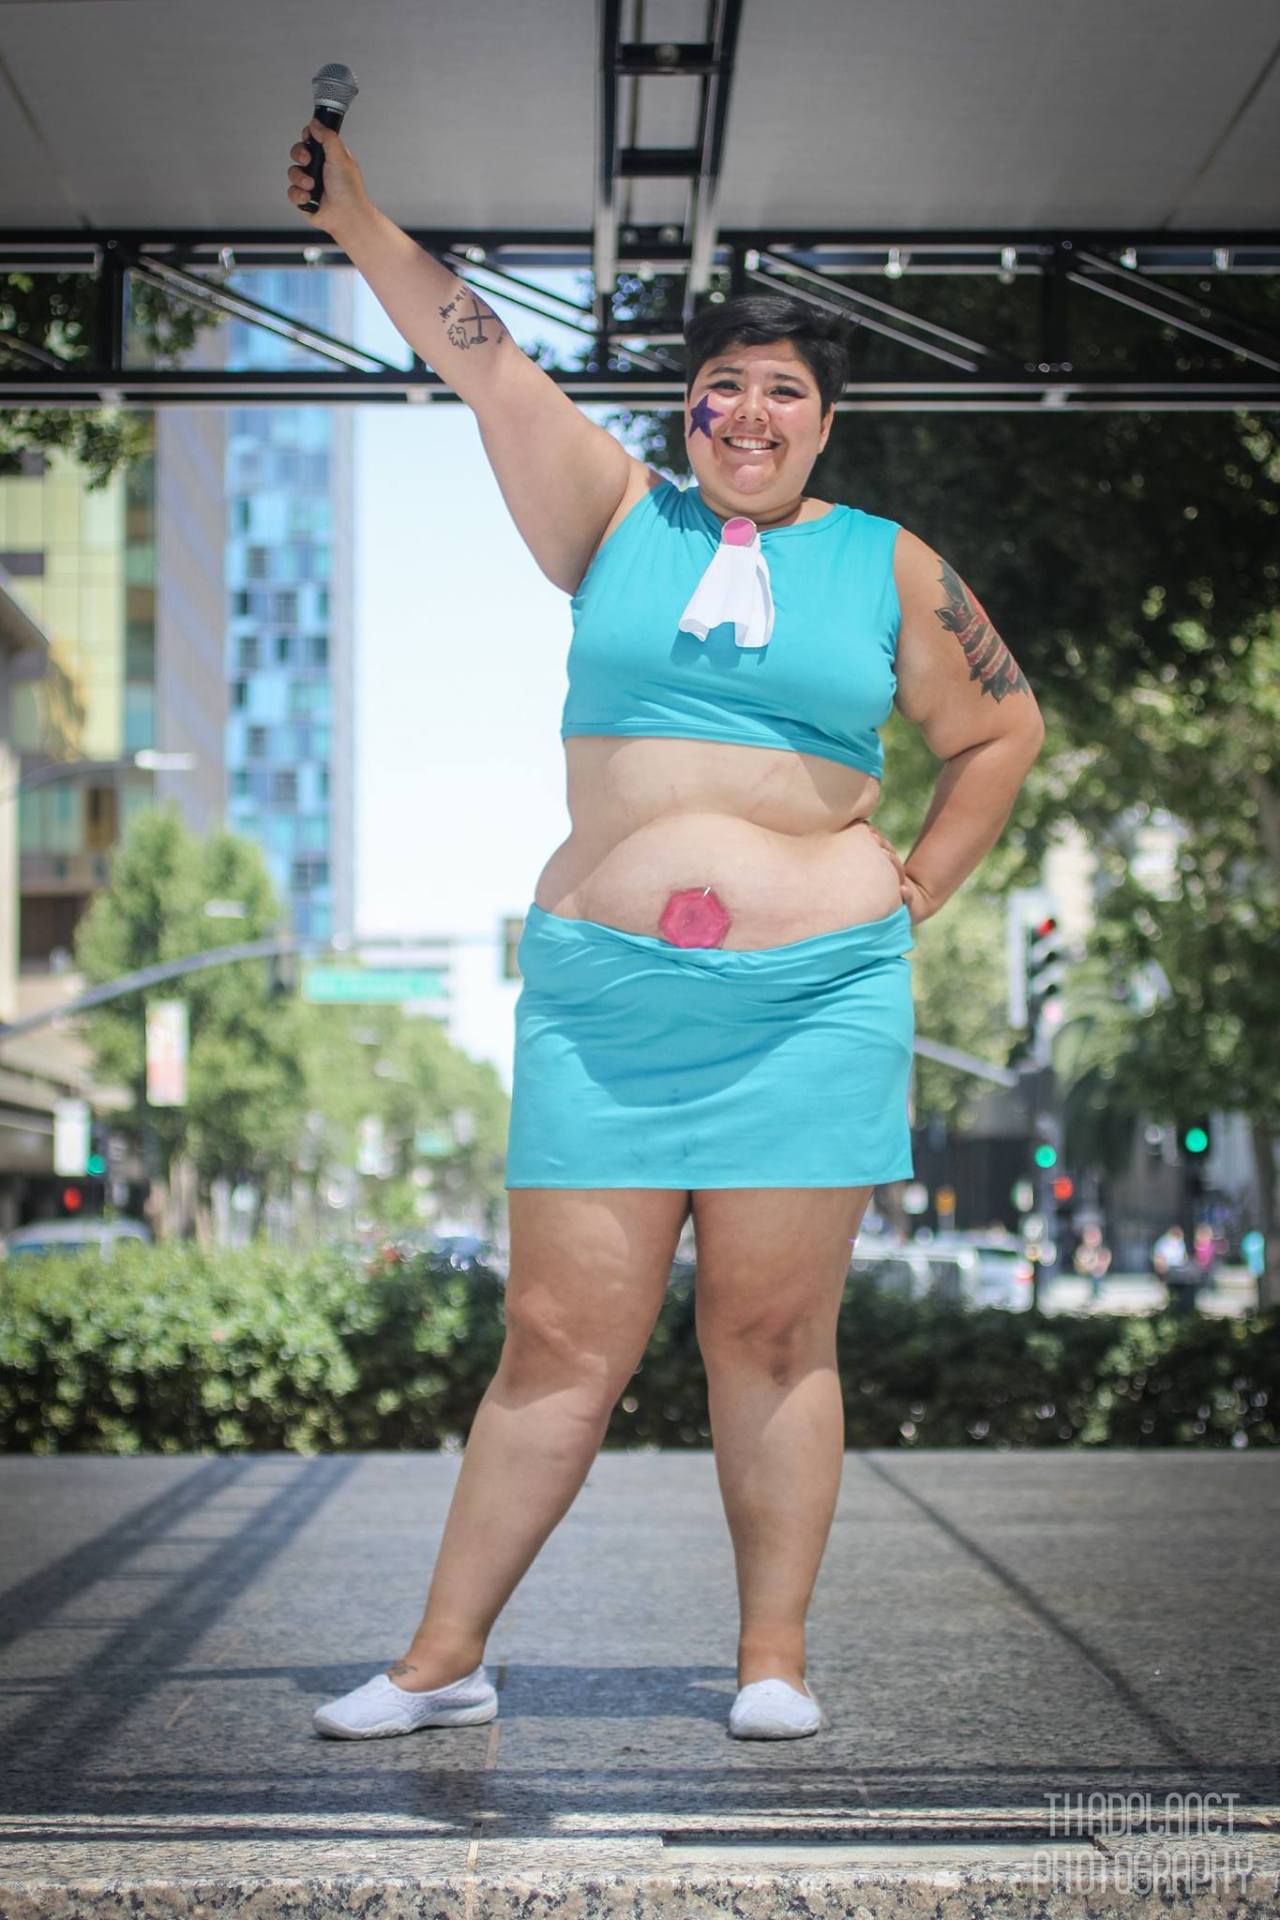 hello all, my name is Makani and i am the creator of this blog. I’m a mixed, trans, queer, fat beginner cosplayer! (they/them) So, these are some of my cosplay photos. (Photos by...